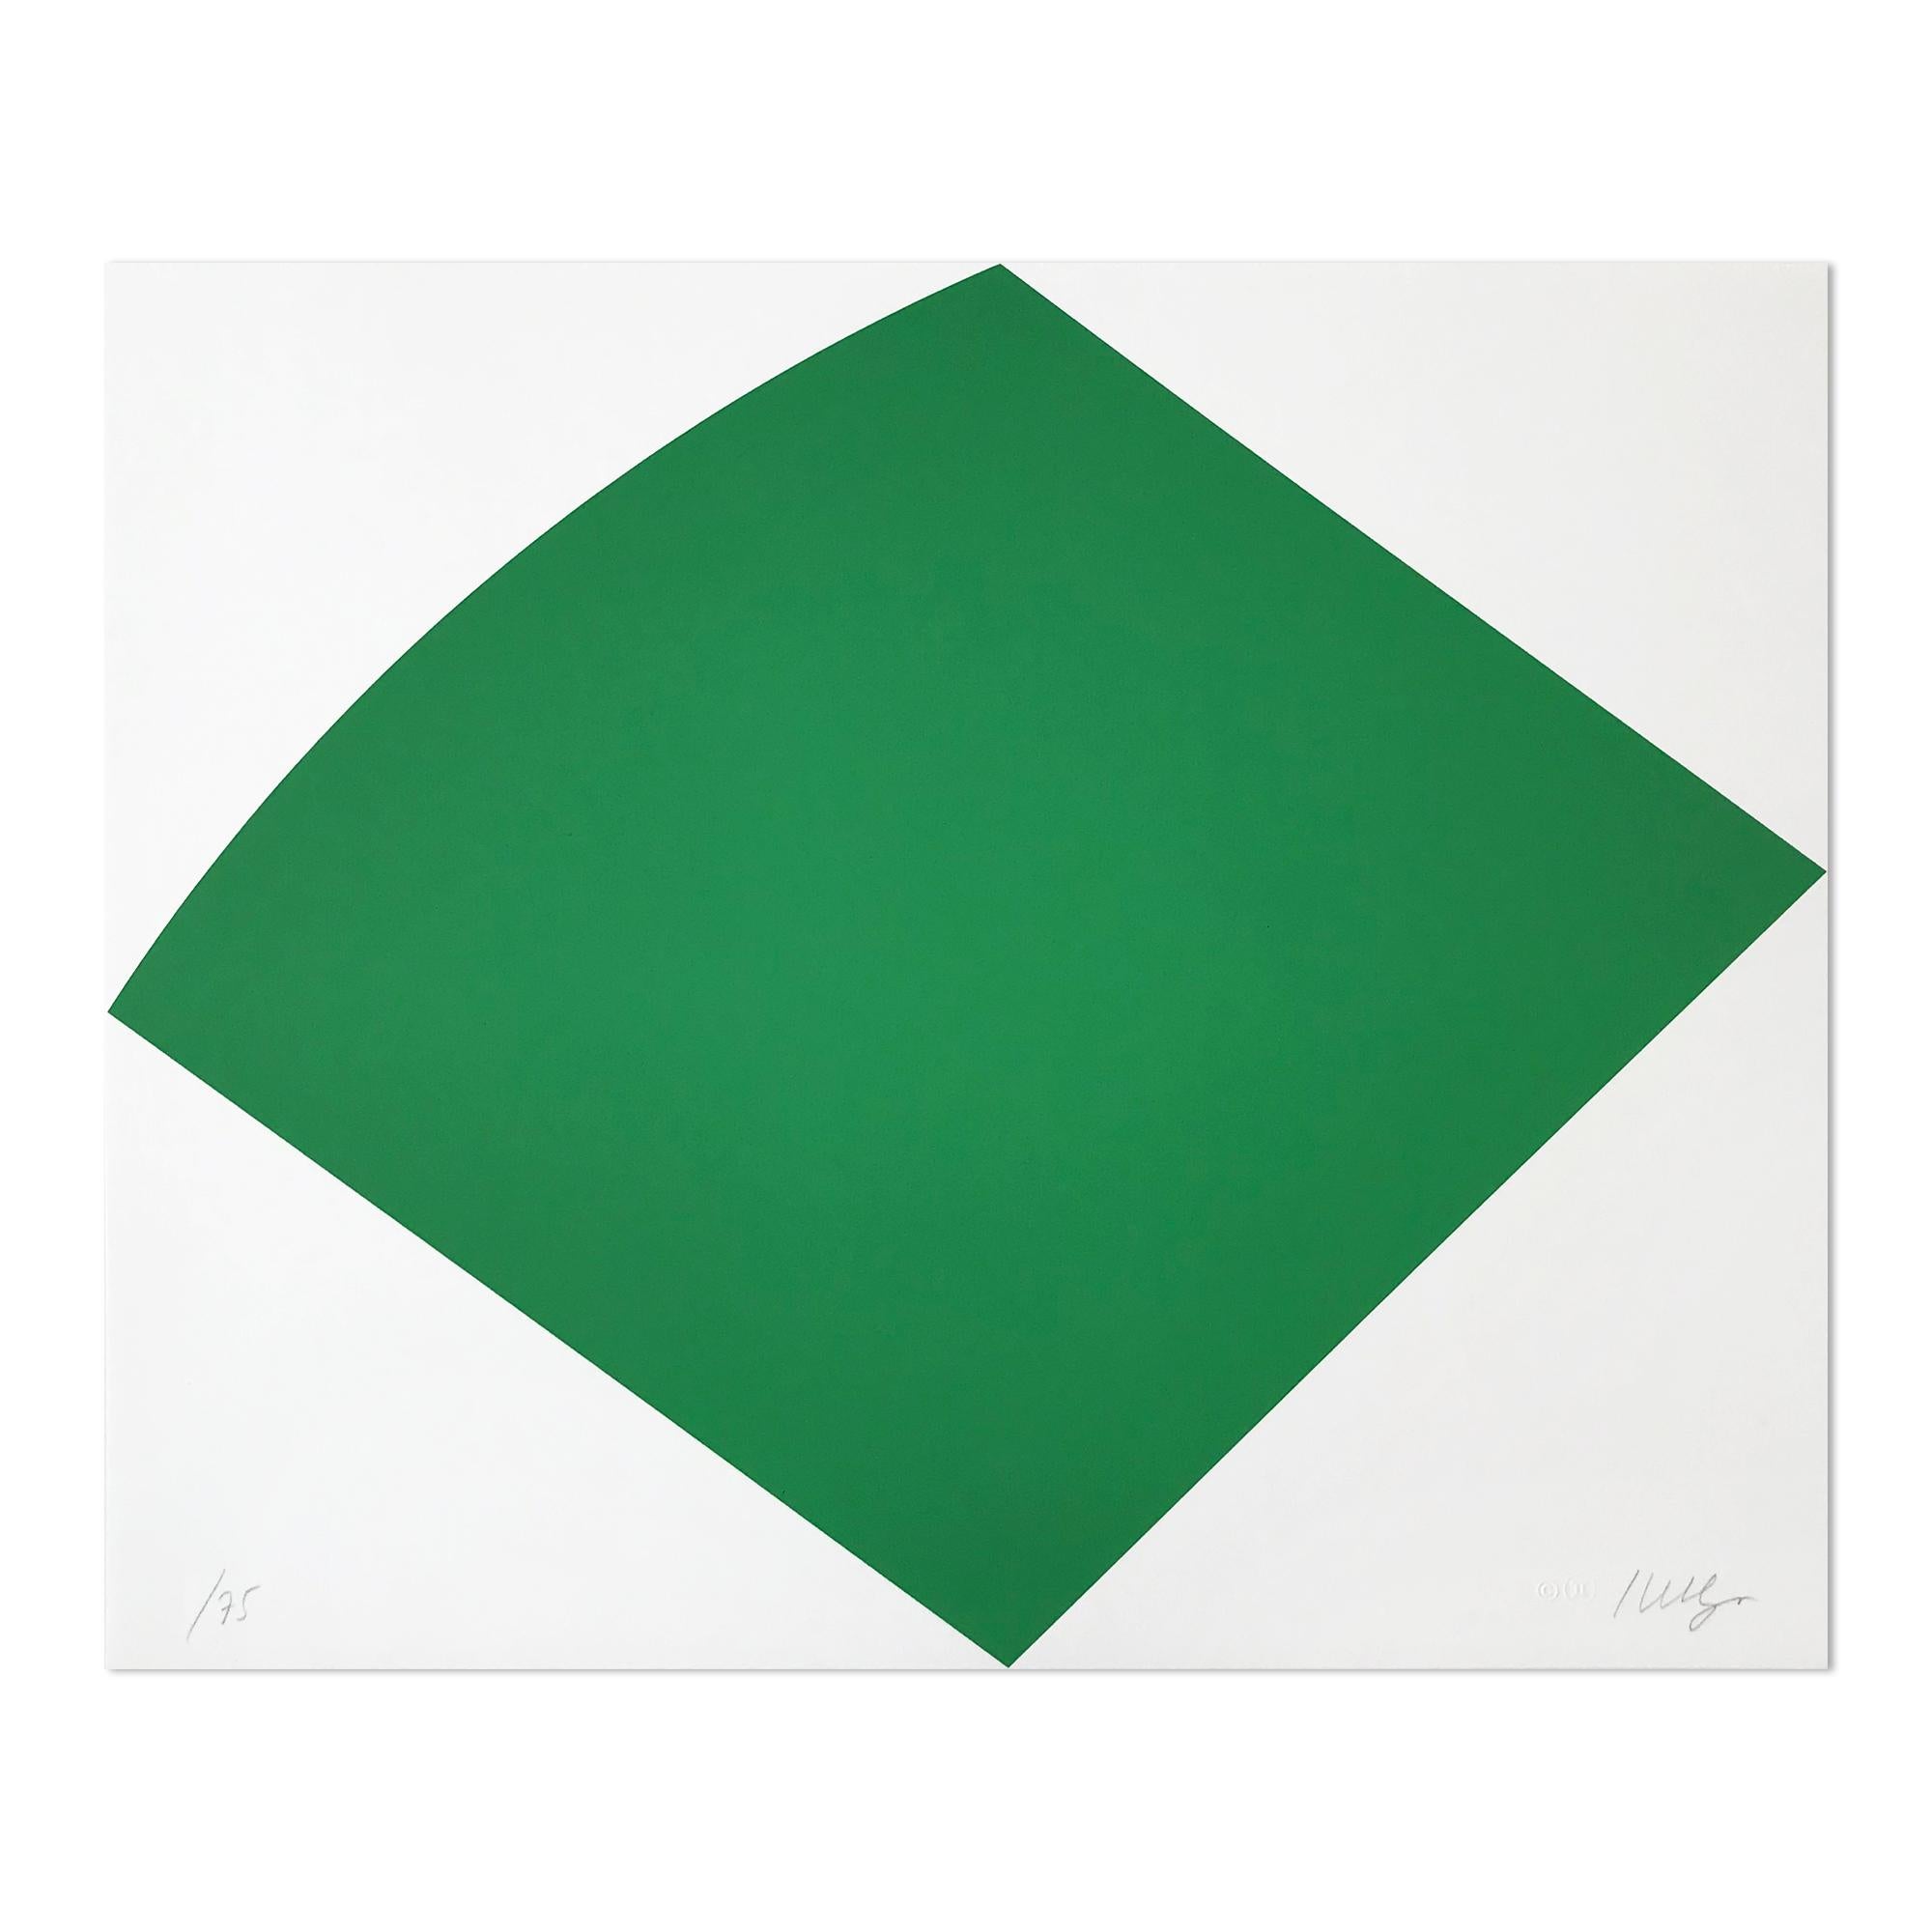 Ellsworth Kelly Abstract Painting - Green Curve, Abstract Artist, Geometric Abstraction, Hard-Edge, Minimalism